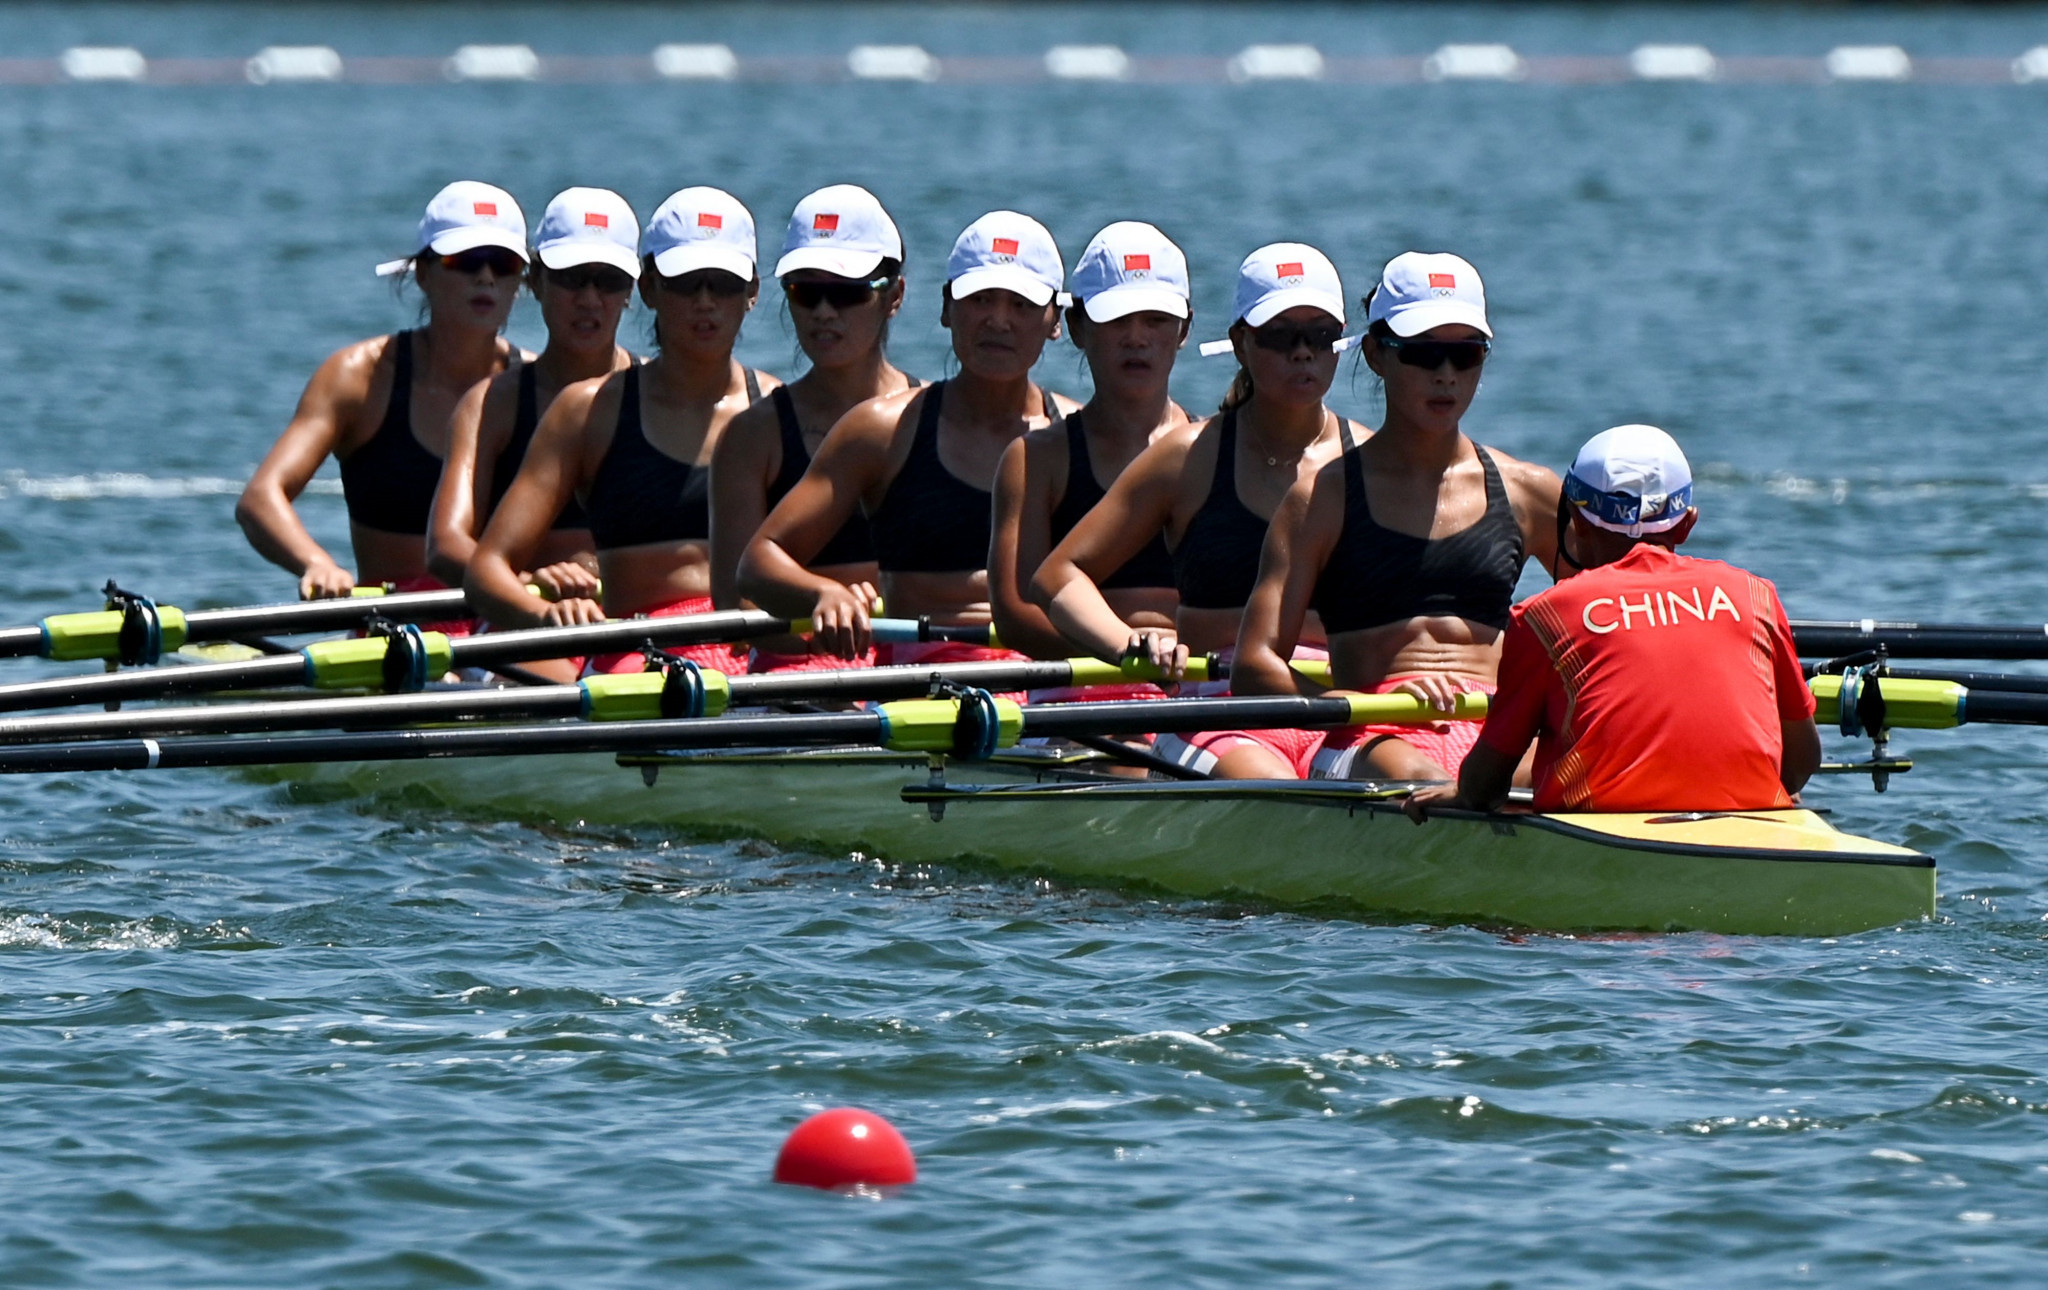 Shanghai among three bidders for 2025 World Rowing Championships after 2021 cancellation